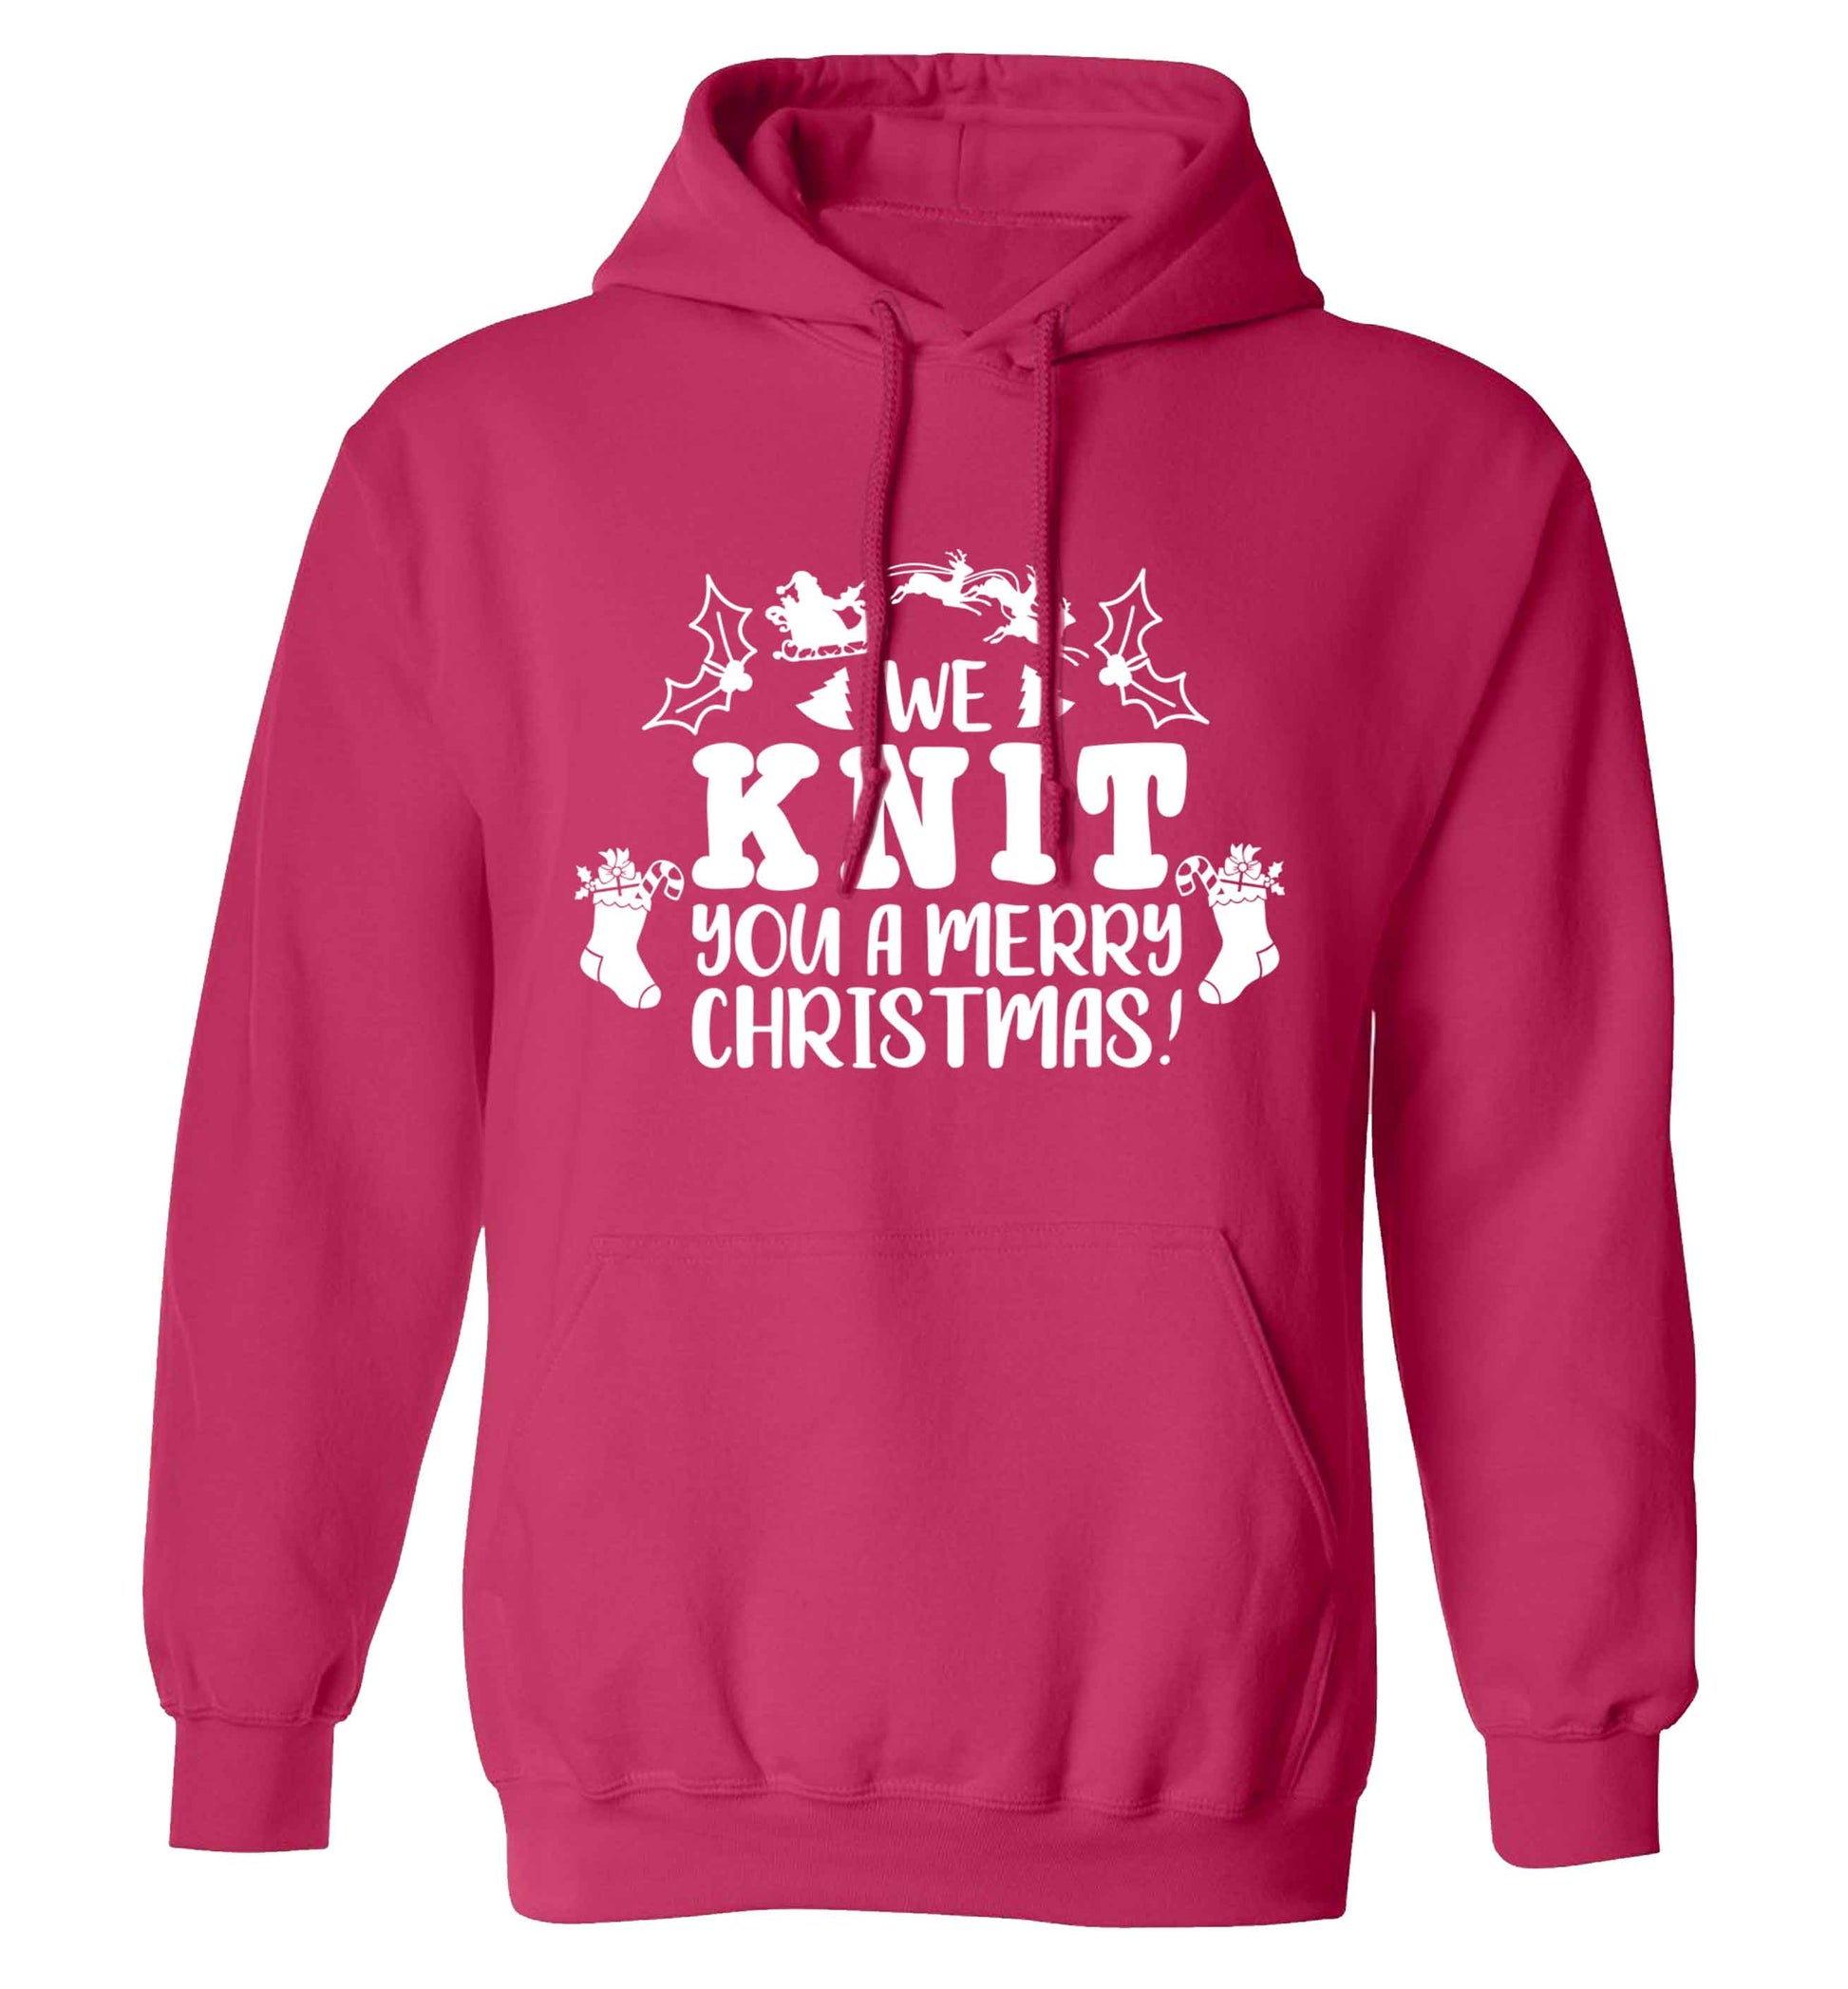 We knit you a merry Christmas adults unisex pink hoodie 2XL